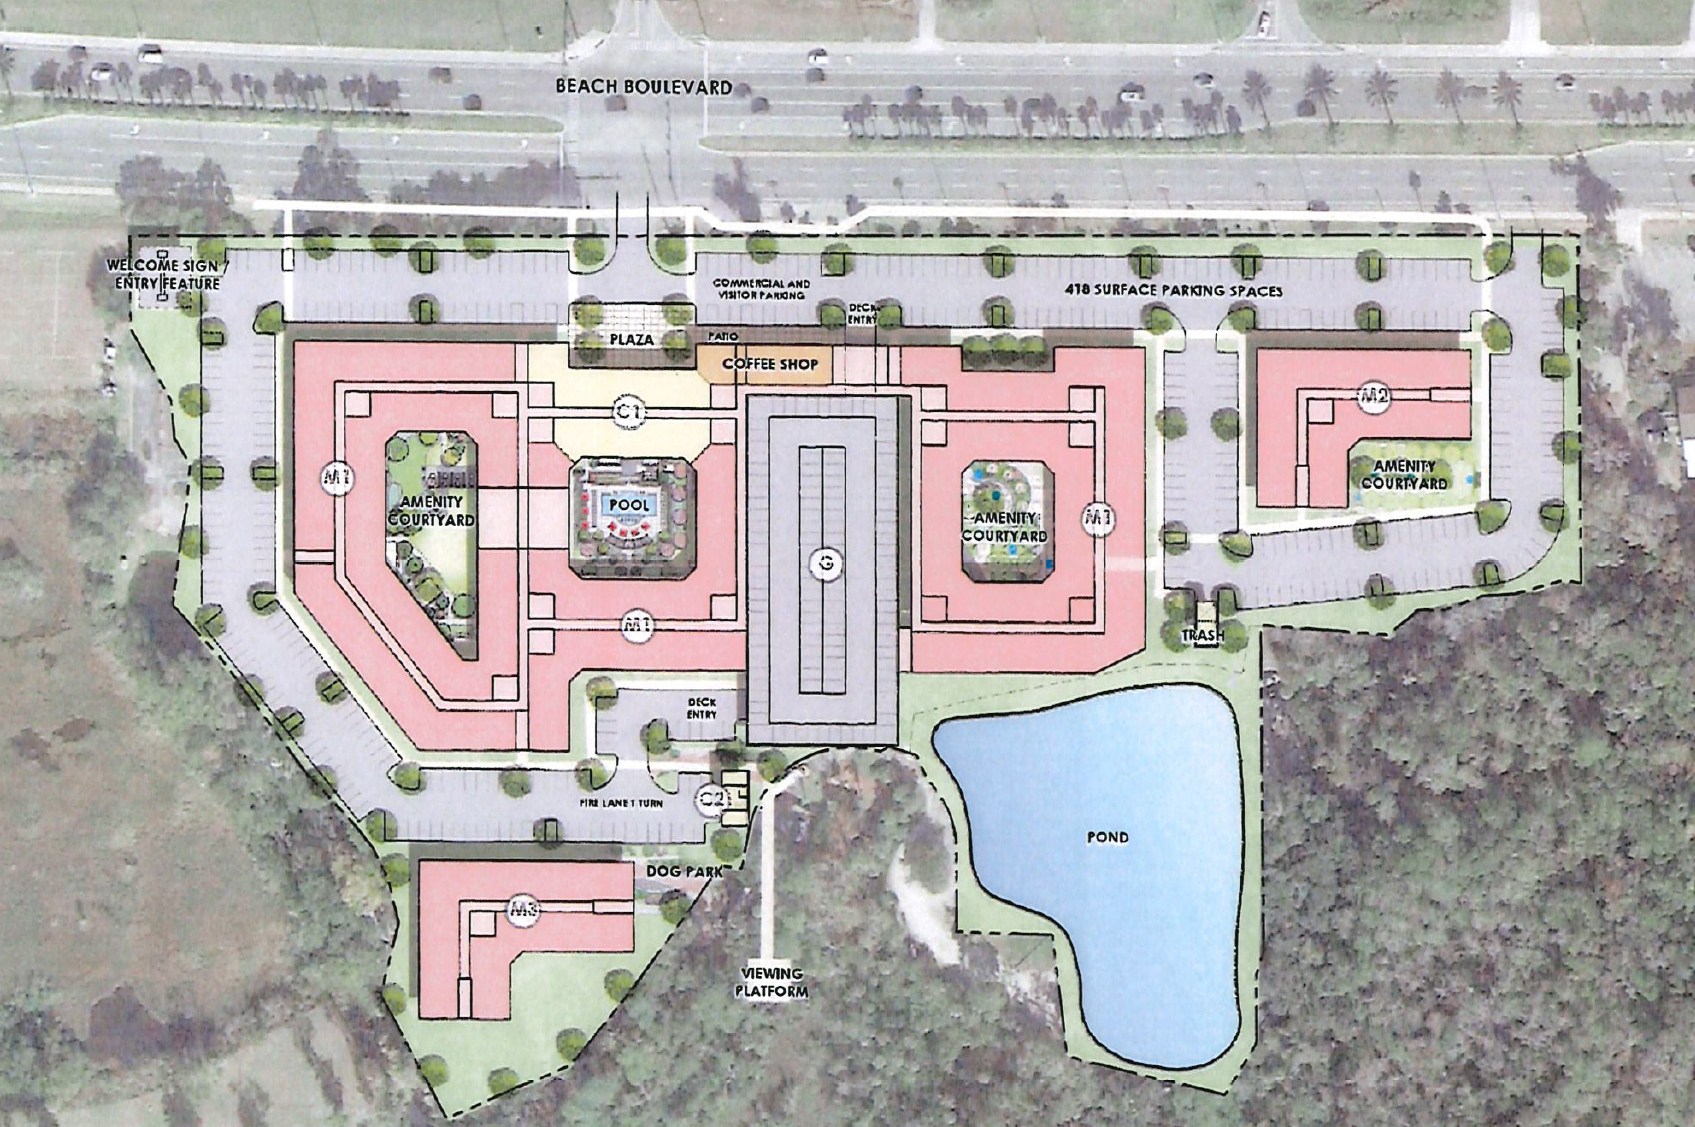 A preliminary site plan for the apartment development.